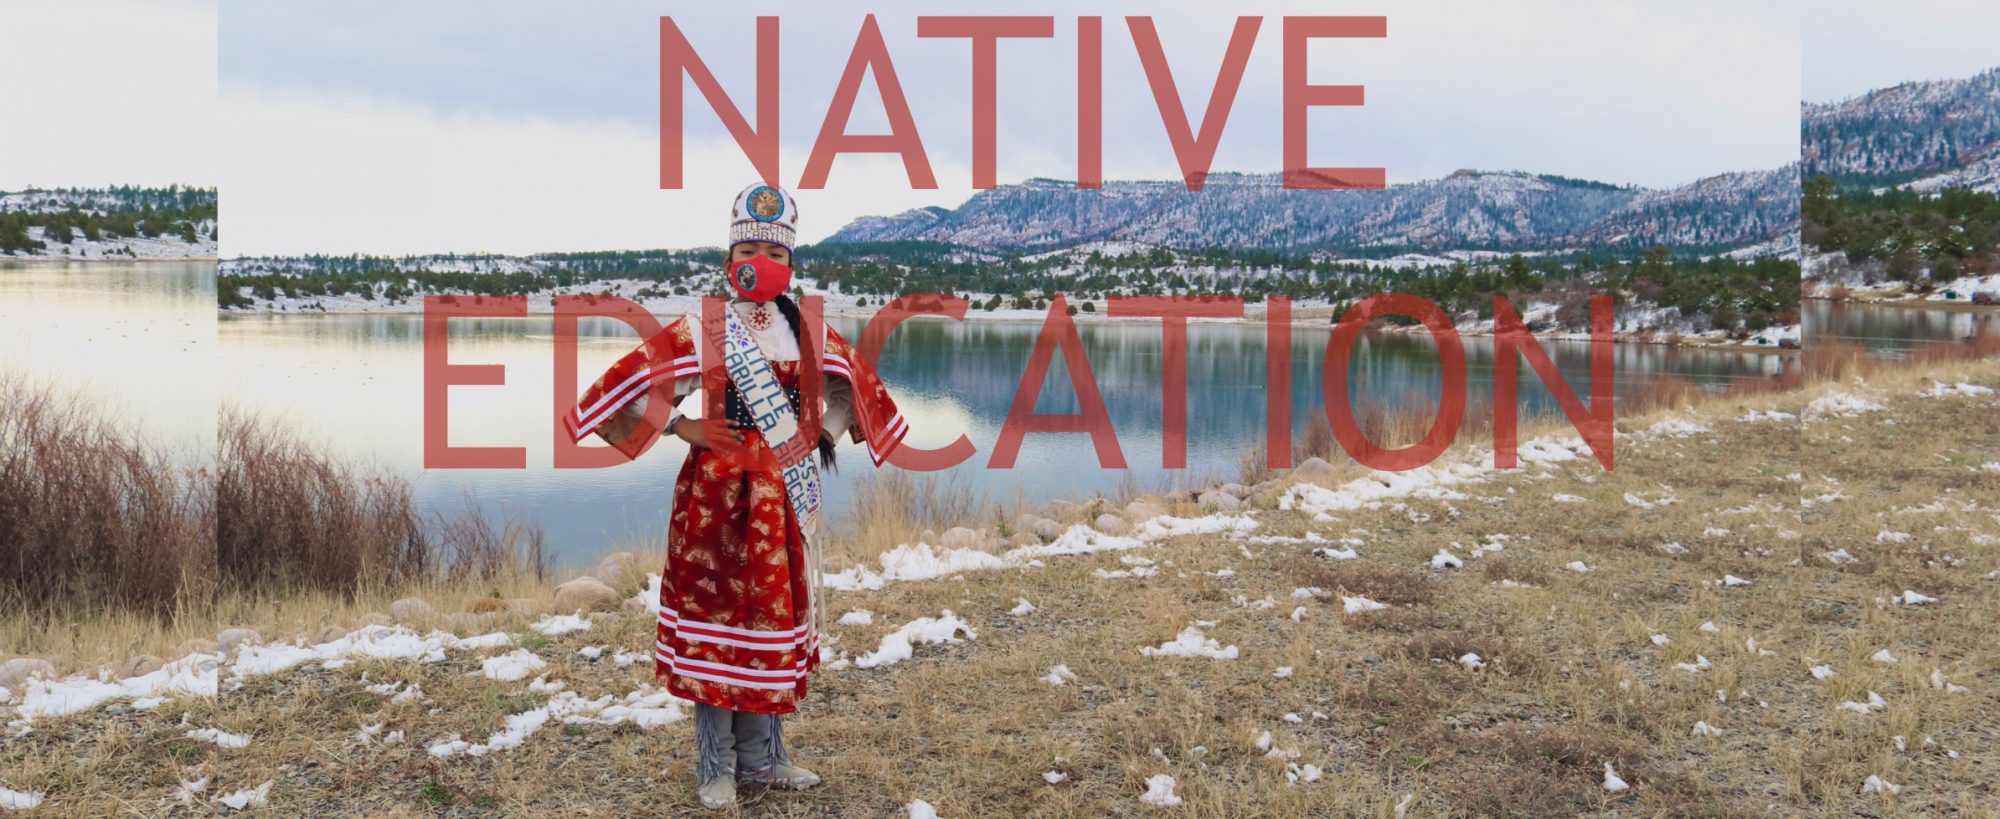 Organizing Against High Stakes Testing in Native Communities